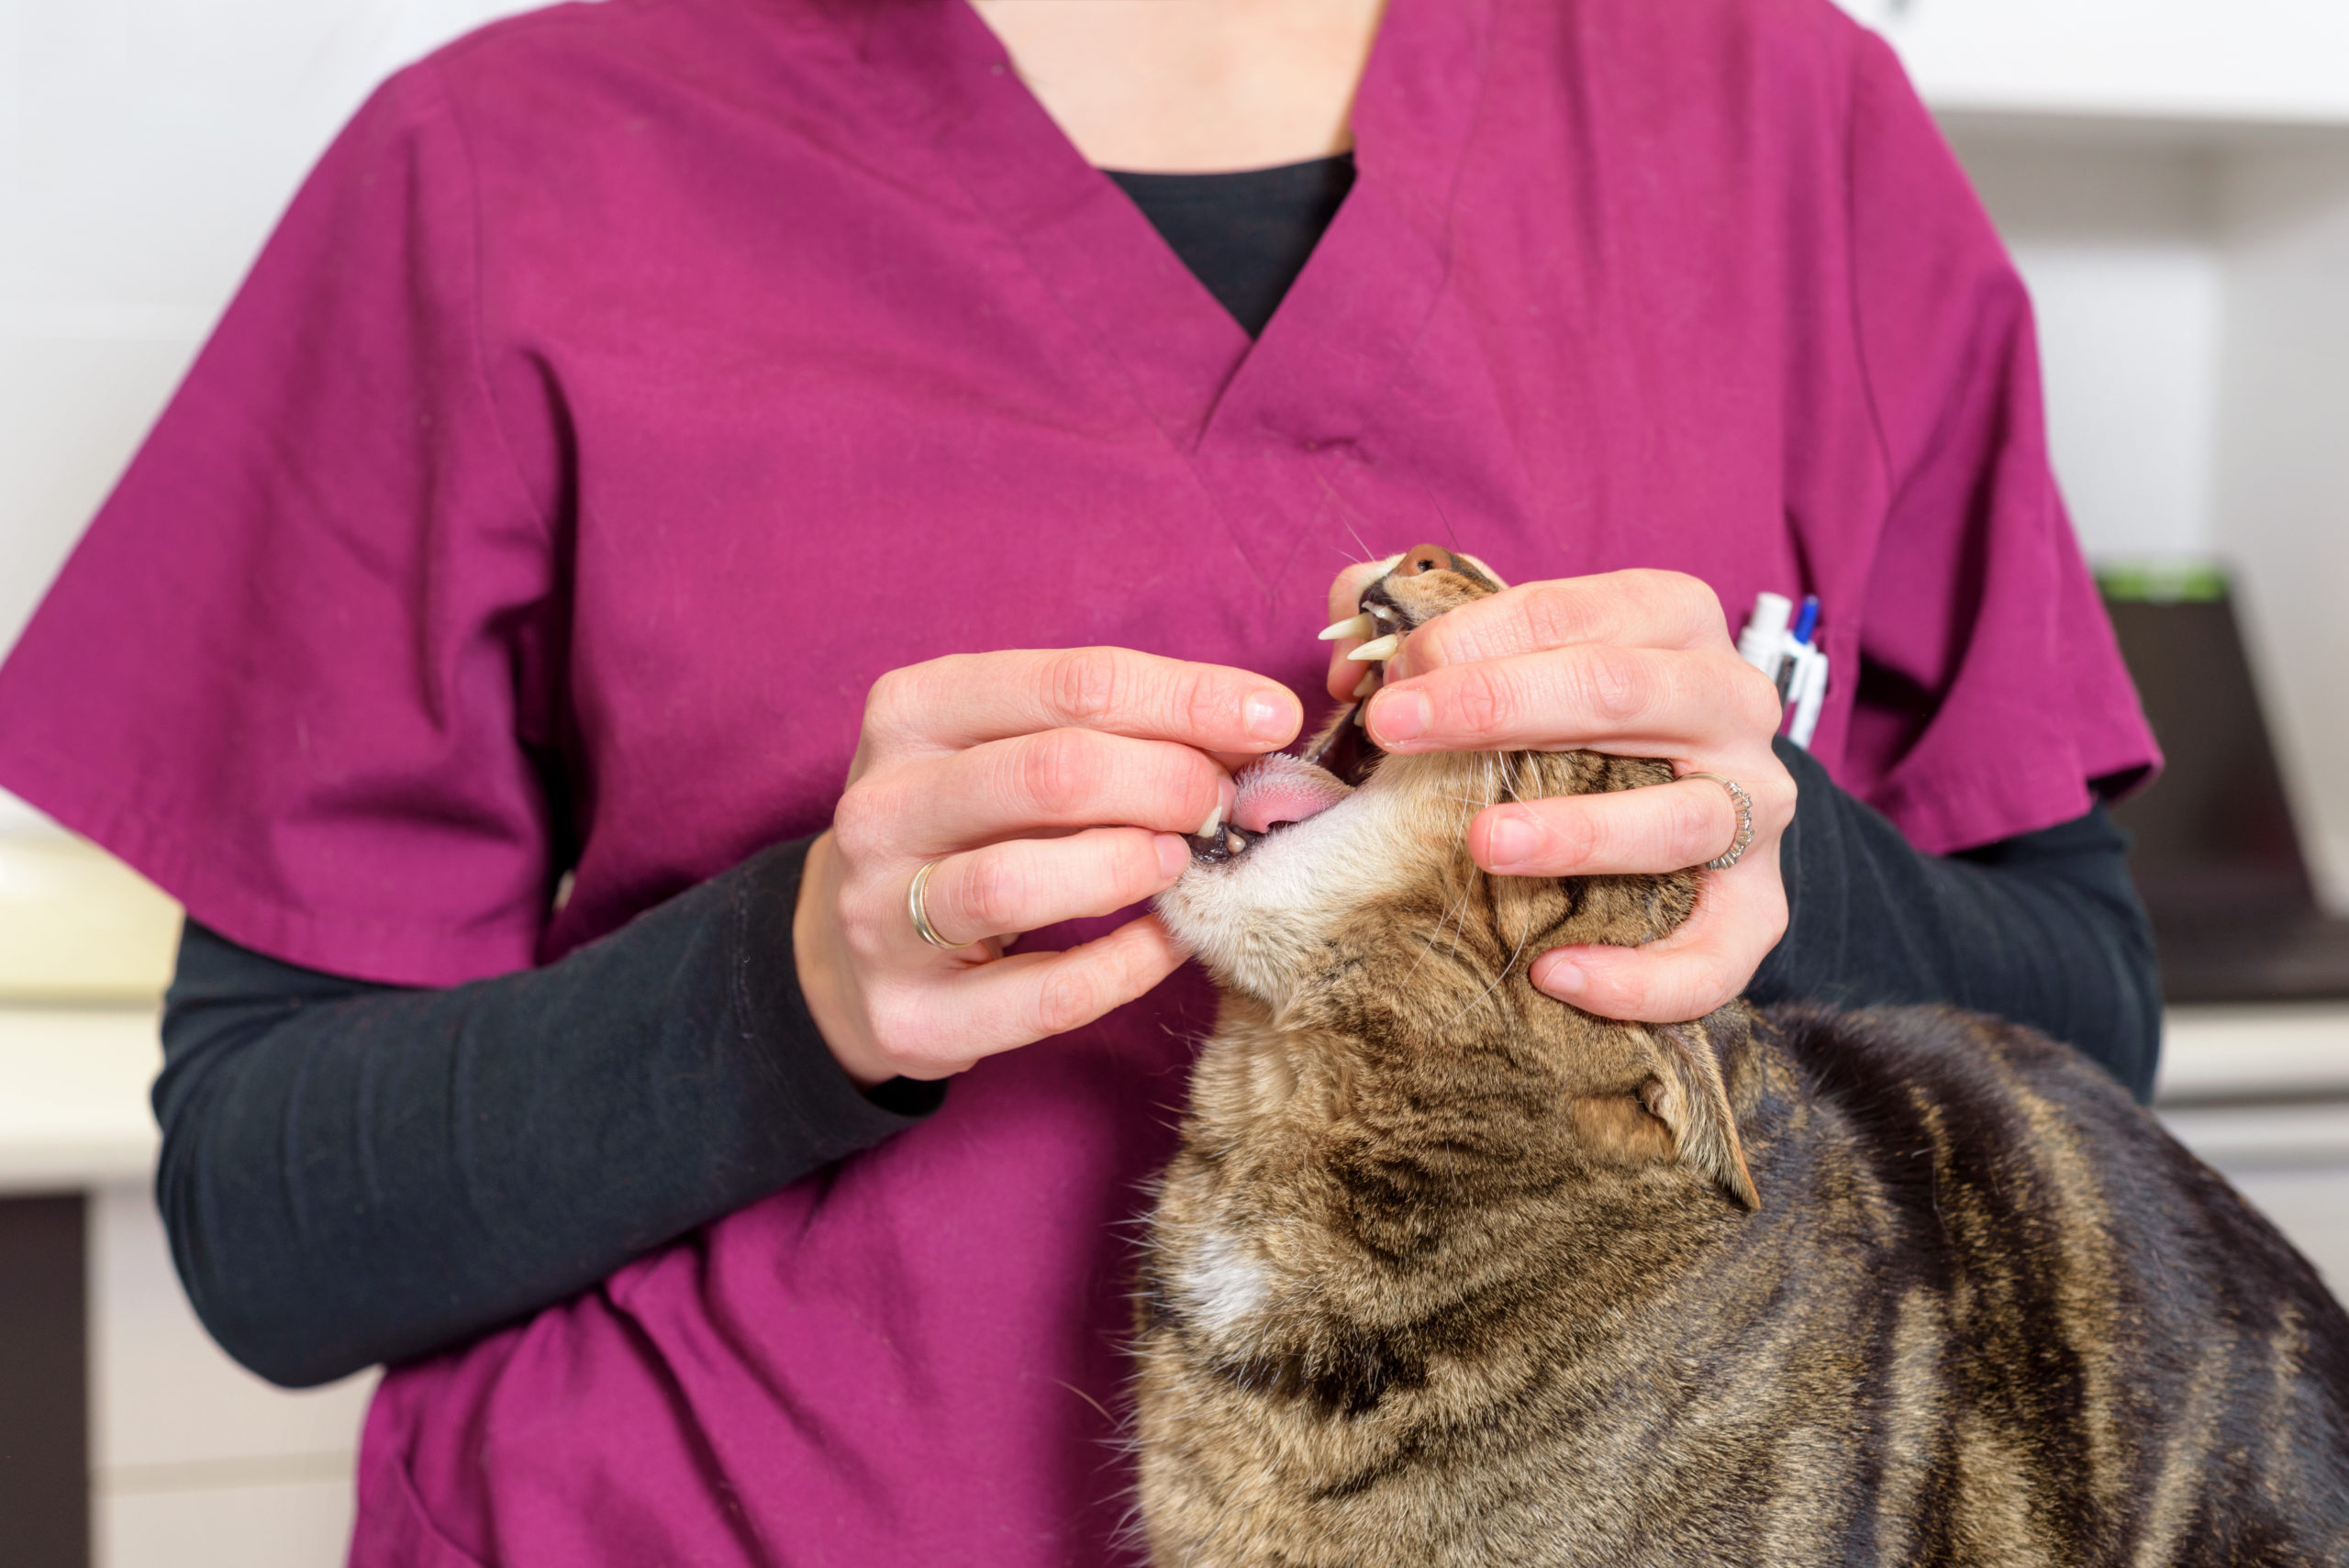 Worms in Cats & Kittens: What You Should Know